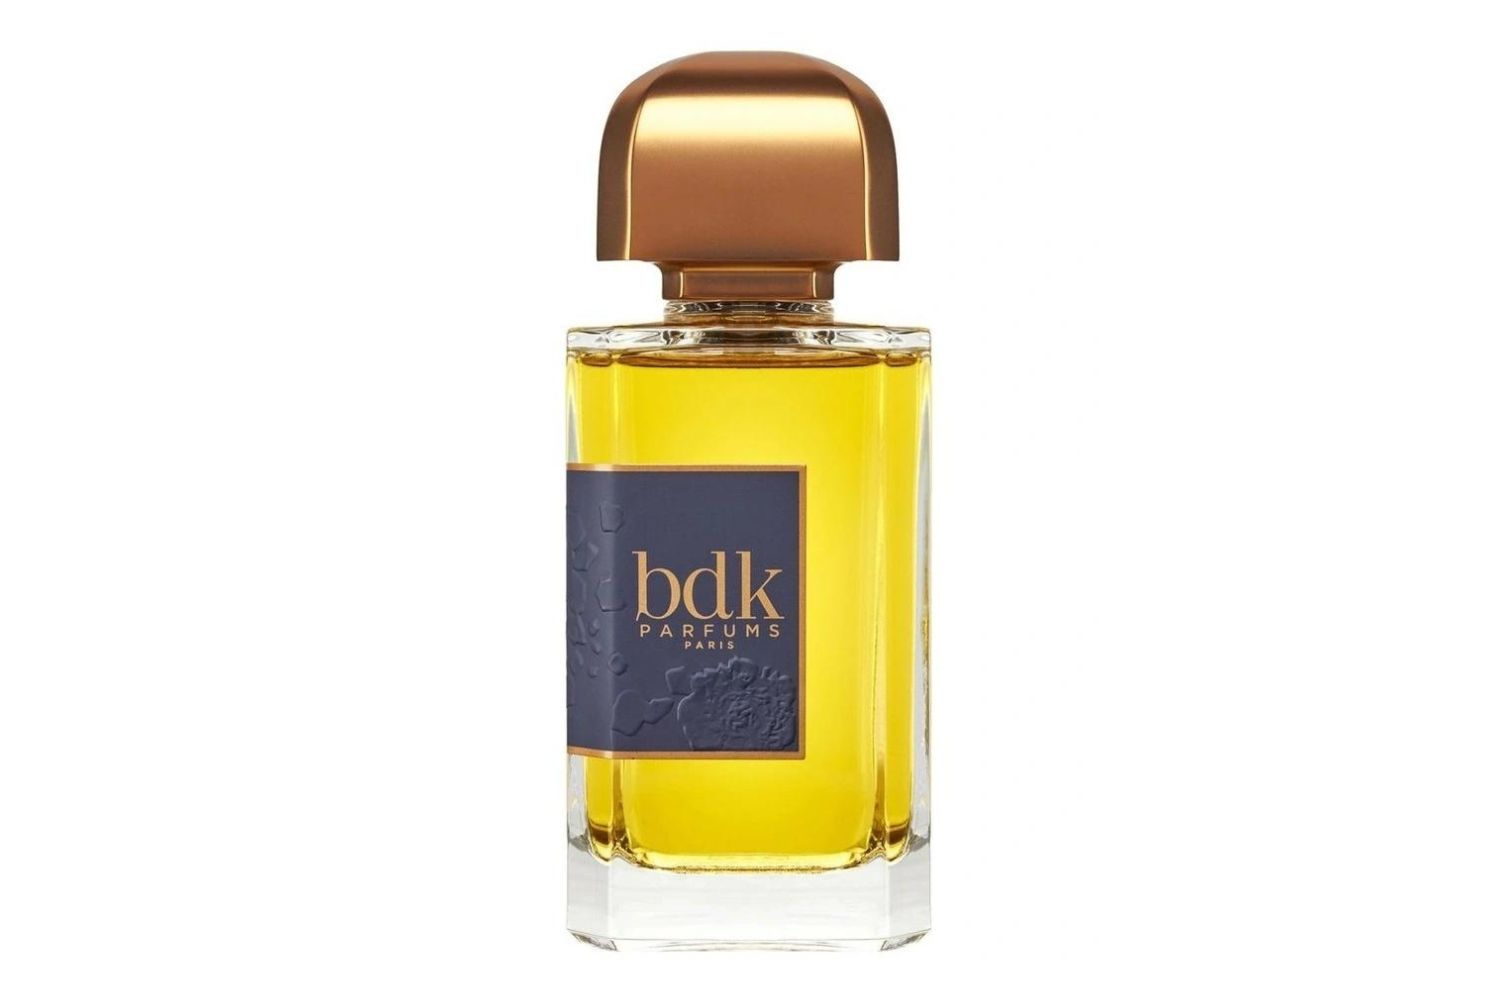 bdk Parfums Tabac Rose EDP, 100ml, $385 at Adore Beauty